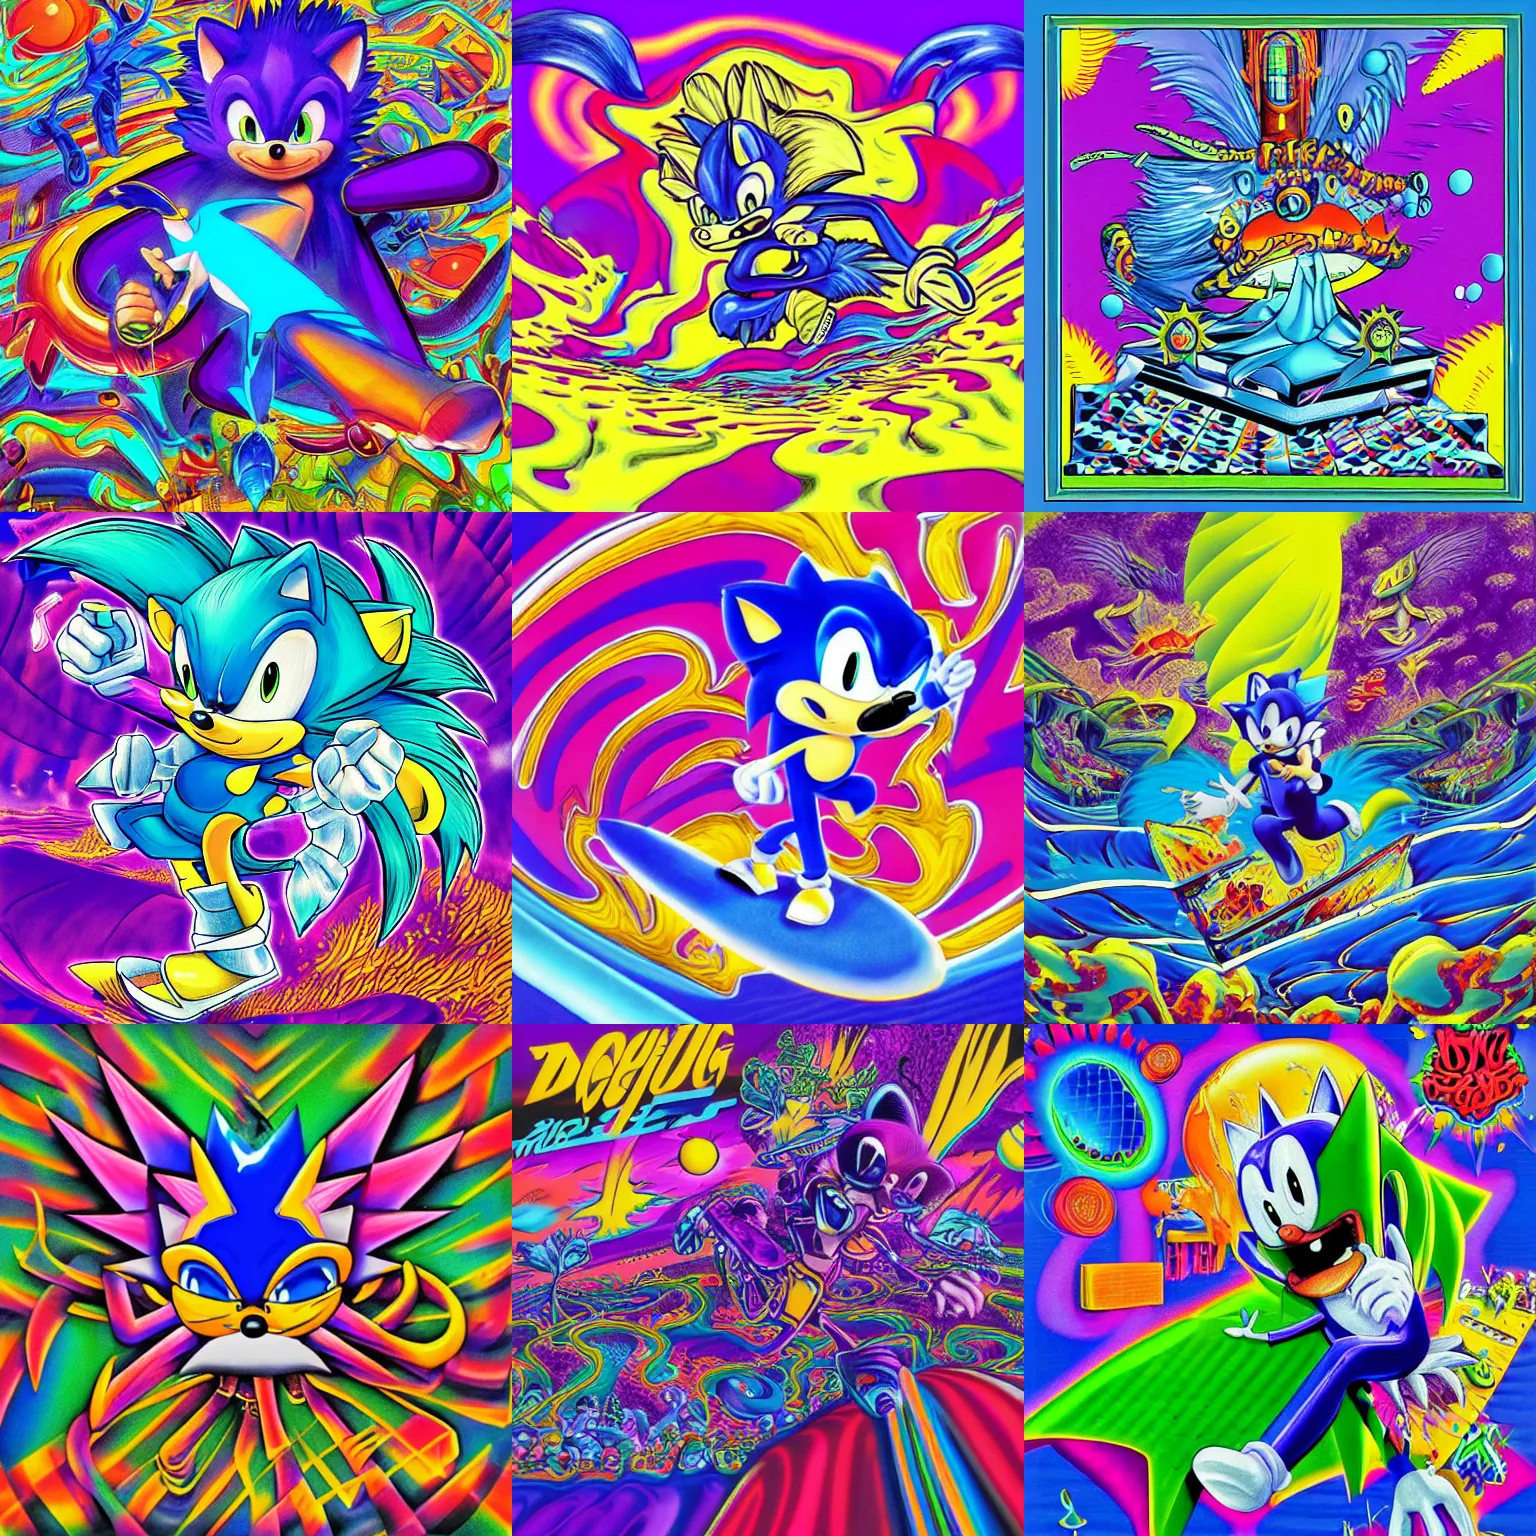 Prompt: surreal, sharp, lowbrow, detailed professional, high quality airbrush art MGMT album cover of a liquid dissolving LSD DMT blue sonic the hedgehog surfing through cyberspace, purple checkerboard background, 1990s 1992 acid house techno Sega Genesis video game album cover